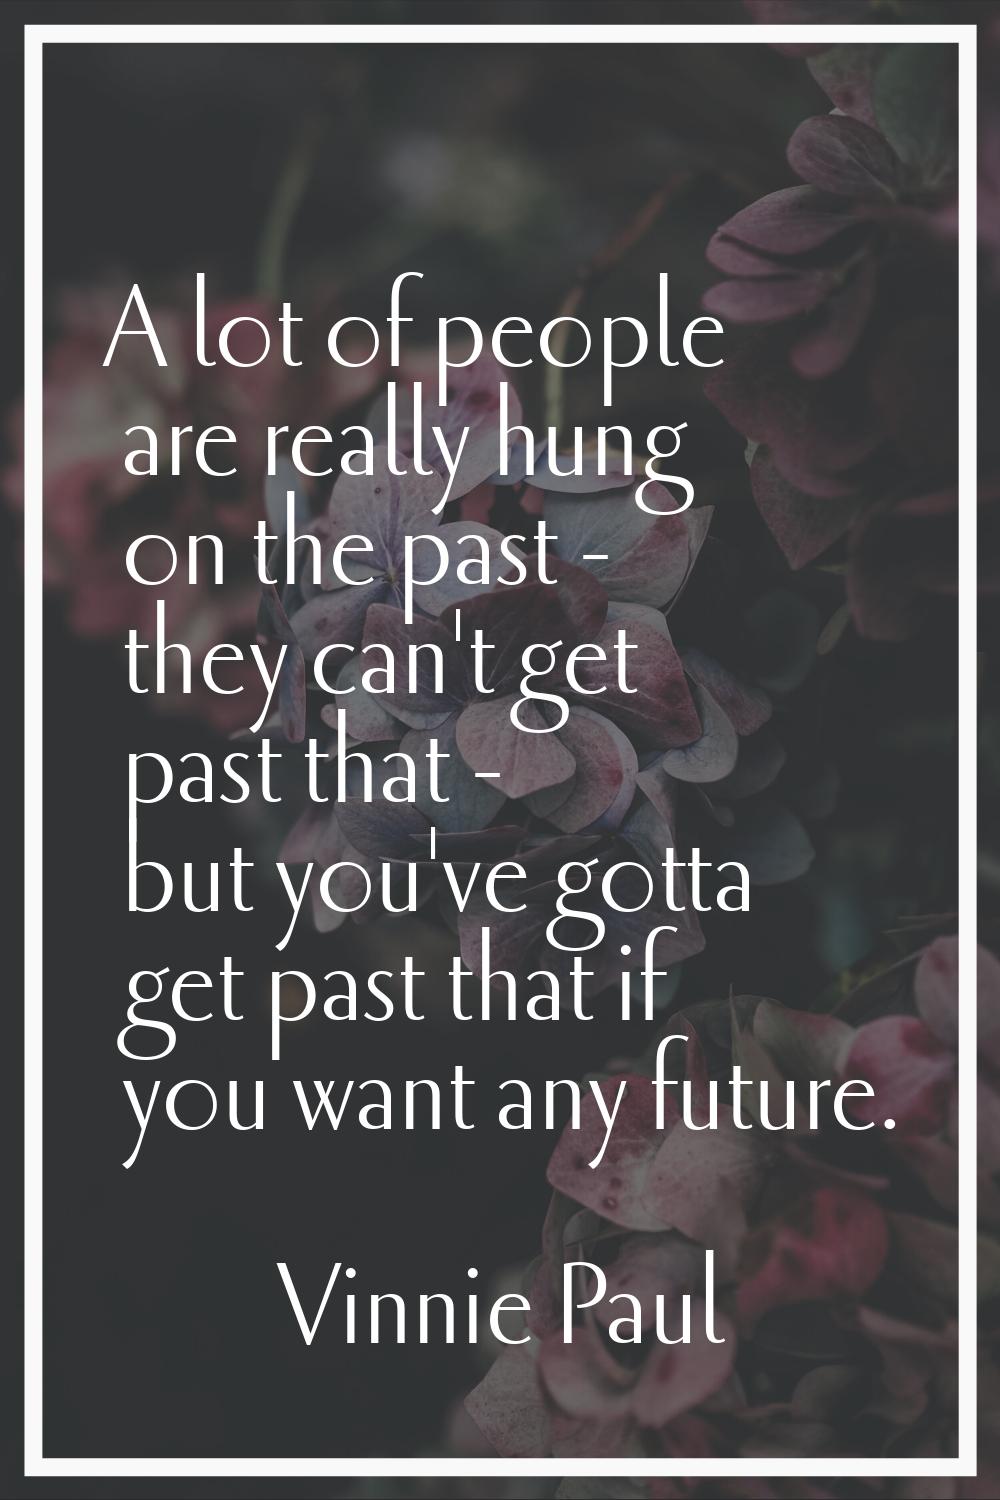 A lot of people are really hung on the past - they can't get past that - but you've gotta get past 